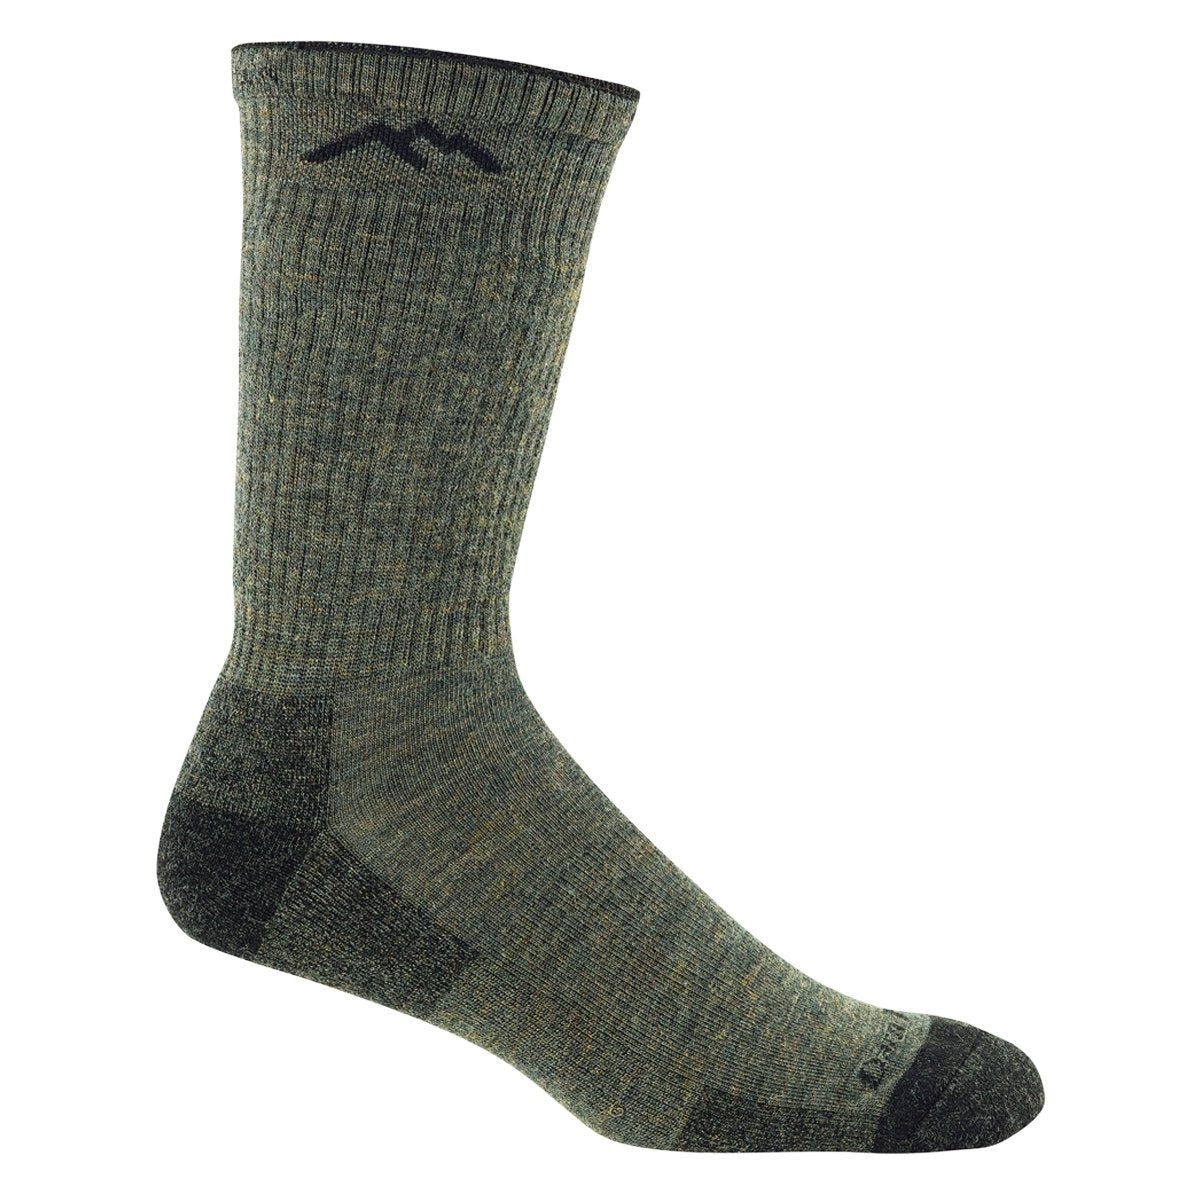 Darn Tough 2011 Boot Midweight Hunting Sock in Forest by GOHUNT | Darn Tough Vermont - GOHUNT Shop